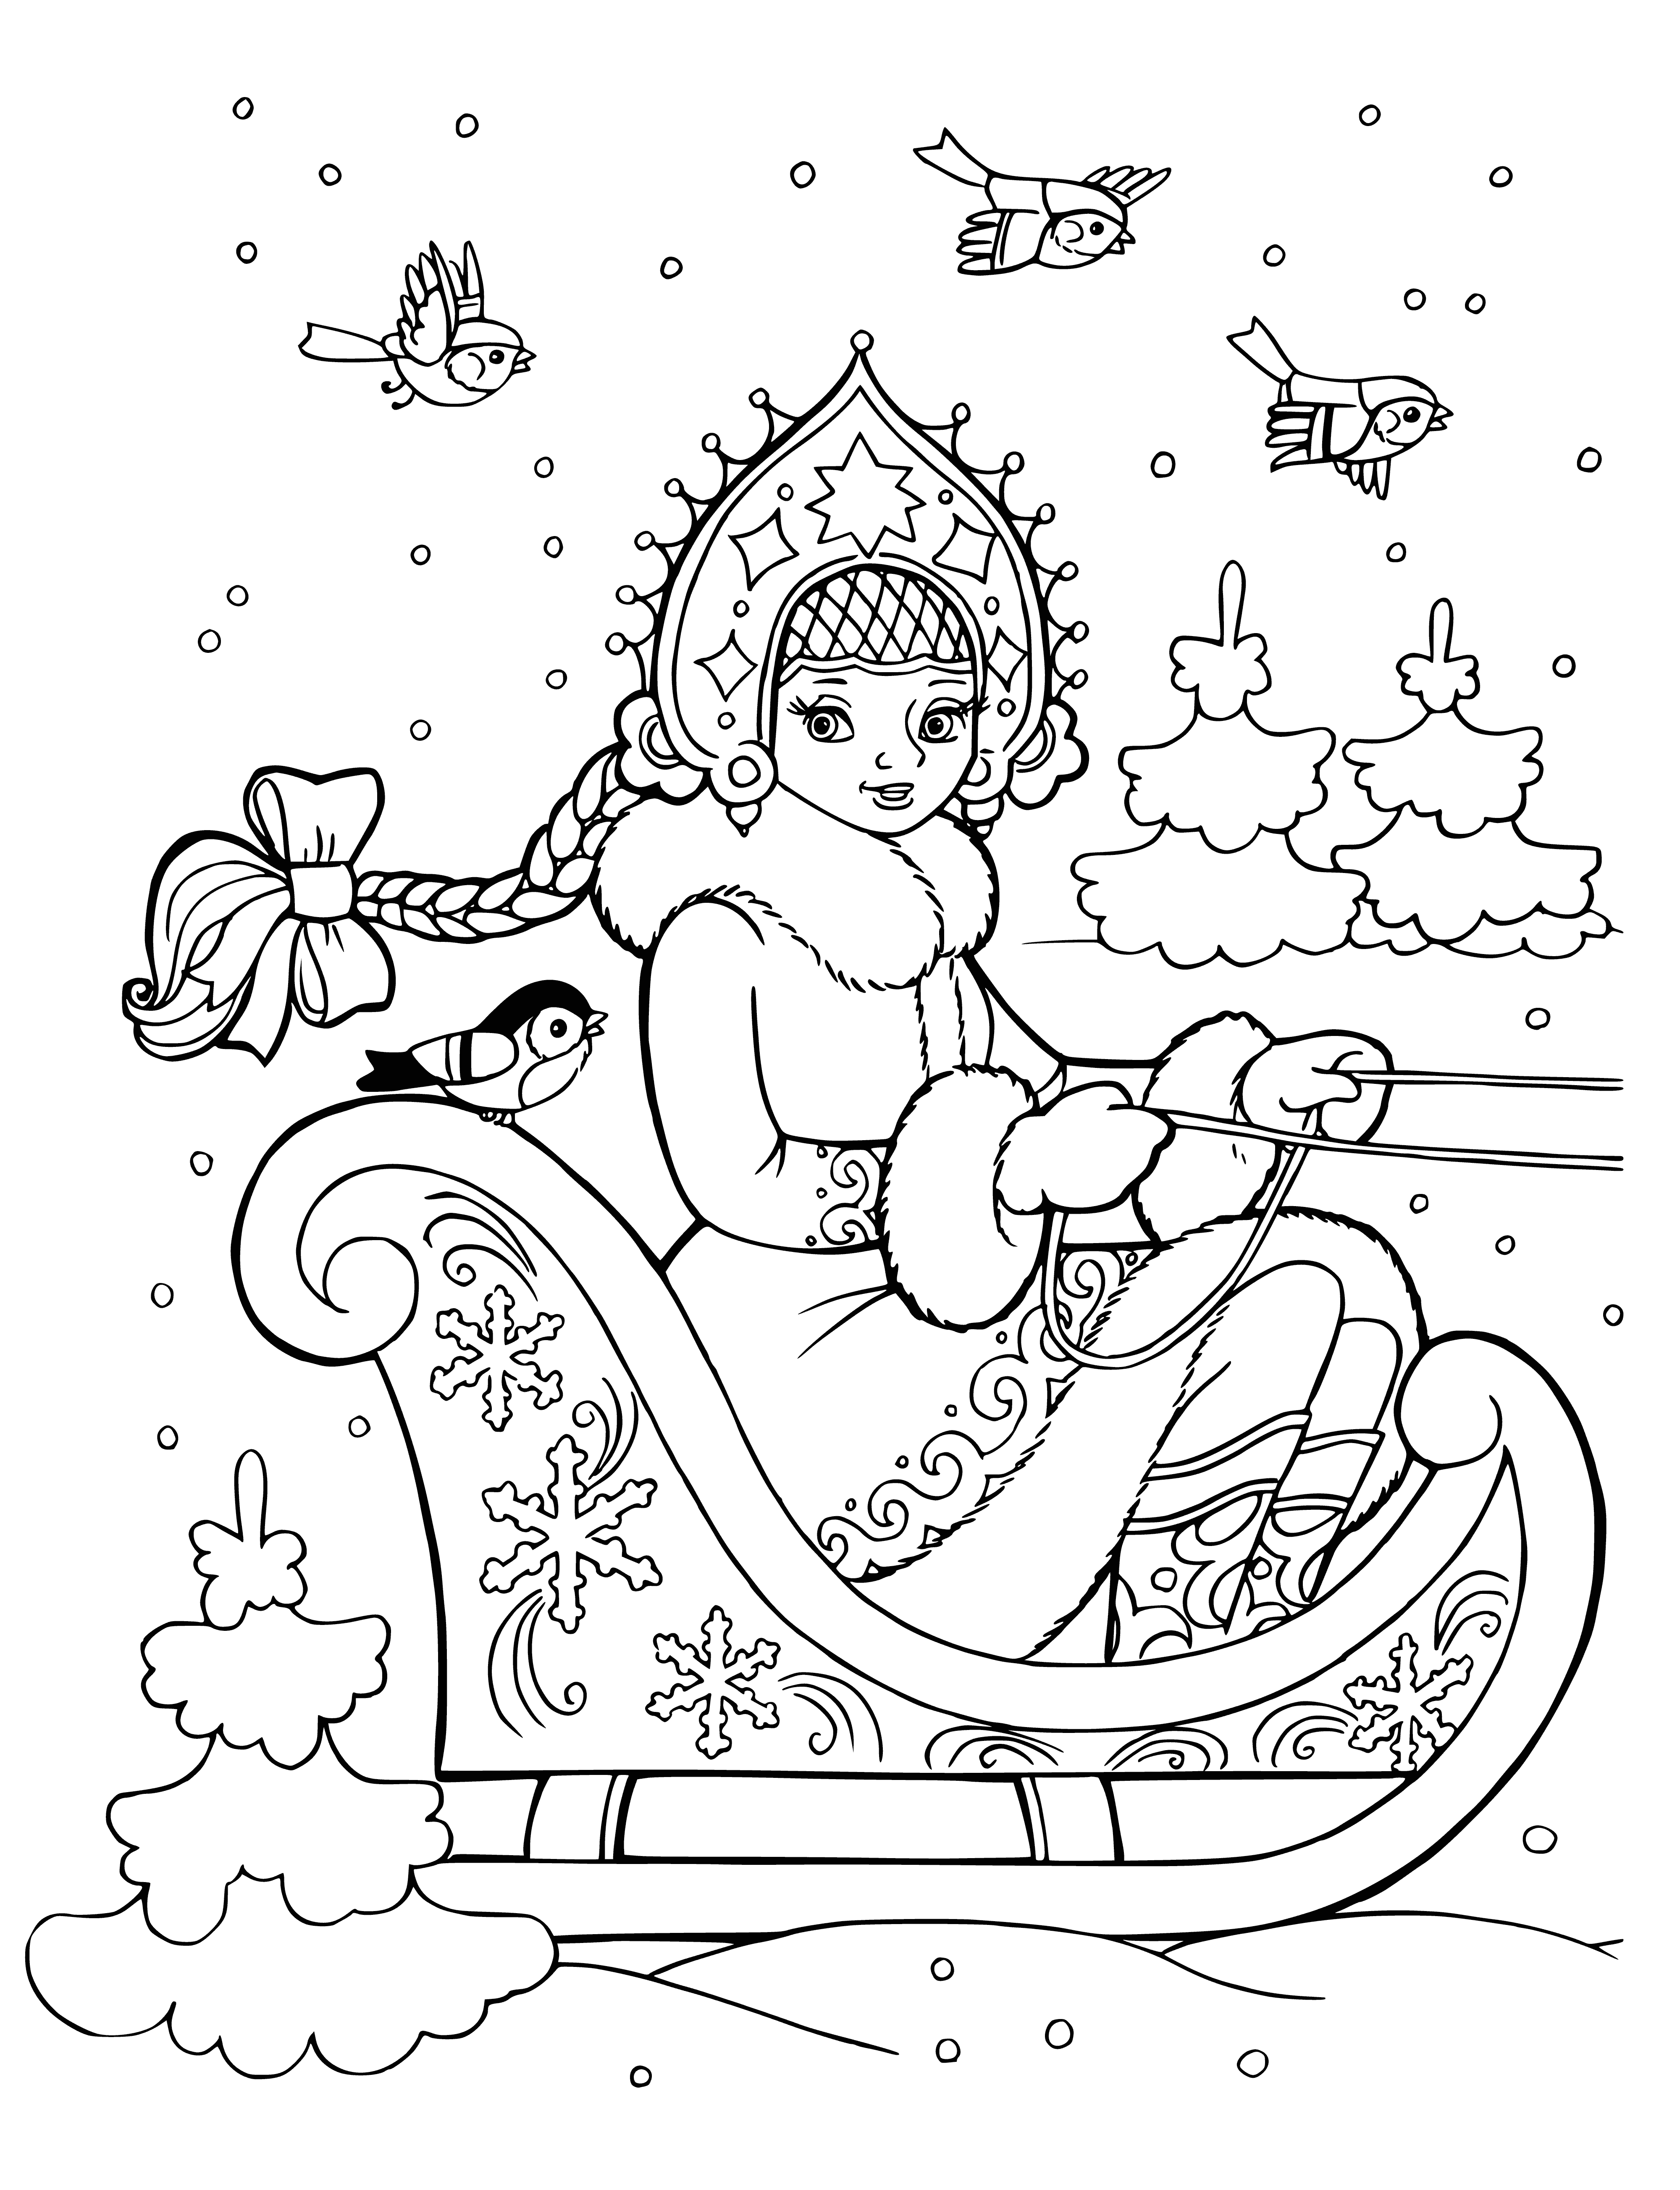 coloring page: Snow Maiden sitting in a sleigh pulled by a reindeer wearing a white scarf, hat & dress, looking at the camera with a smile.